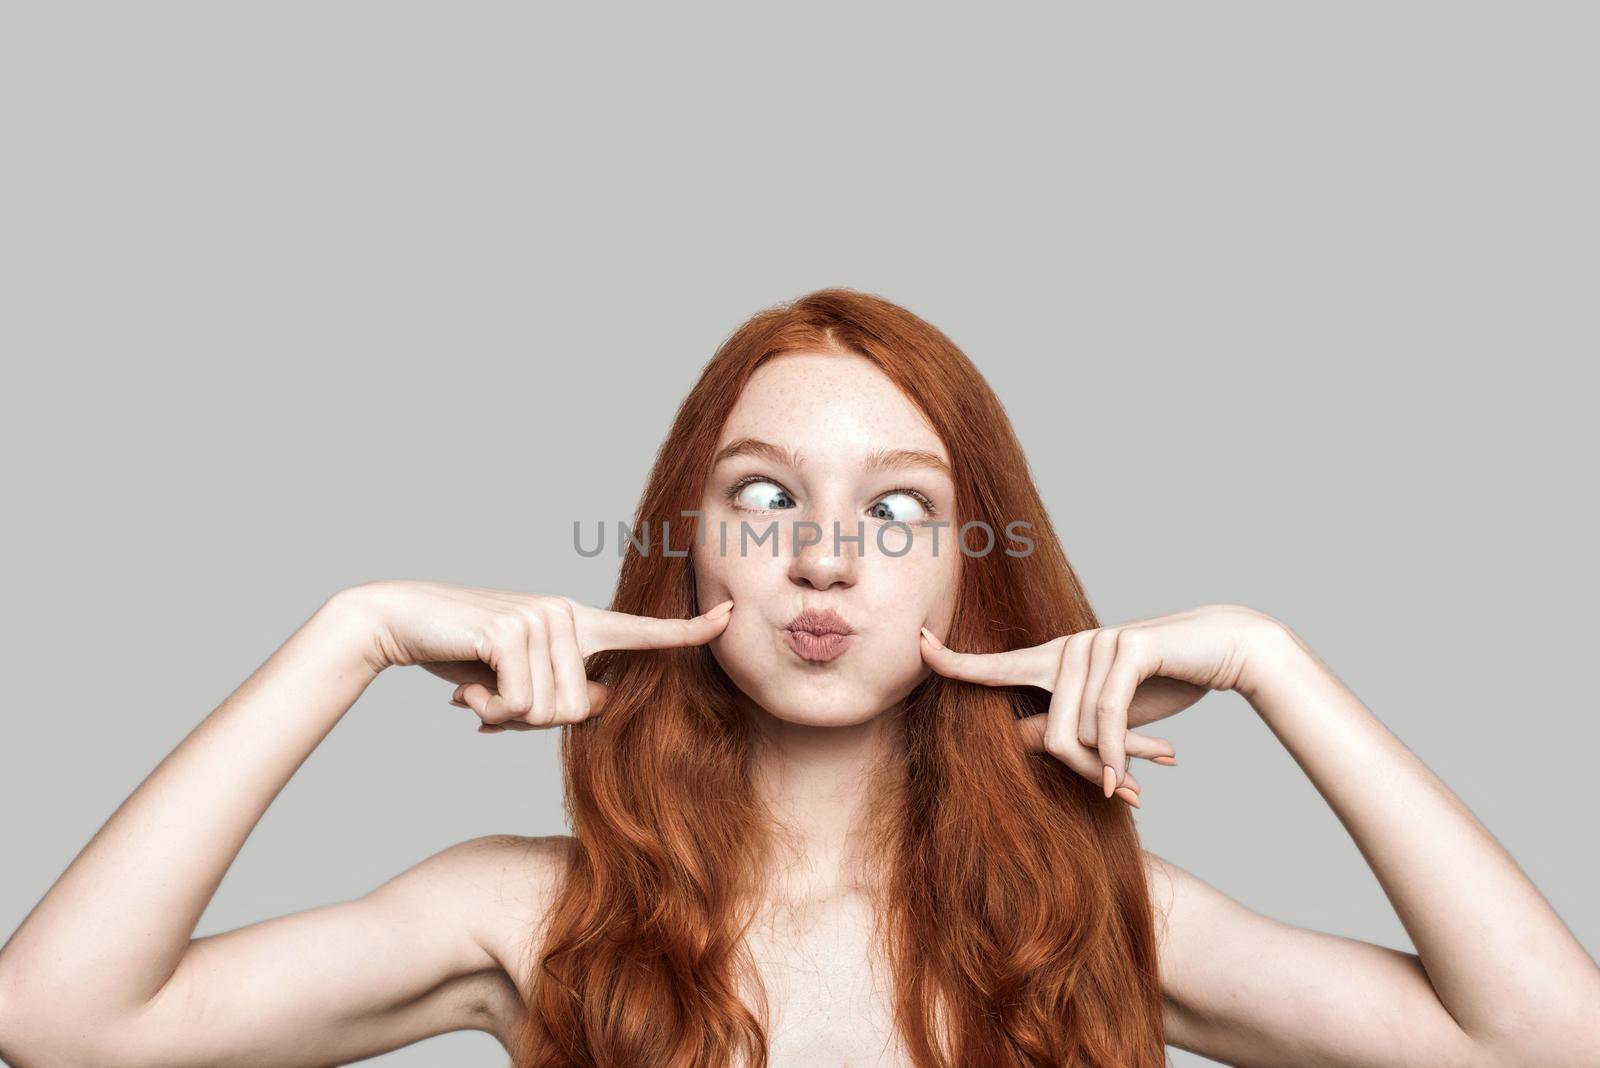 Studio shot of happy young redhead woman making crazy face and grimacing while standing against grey background